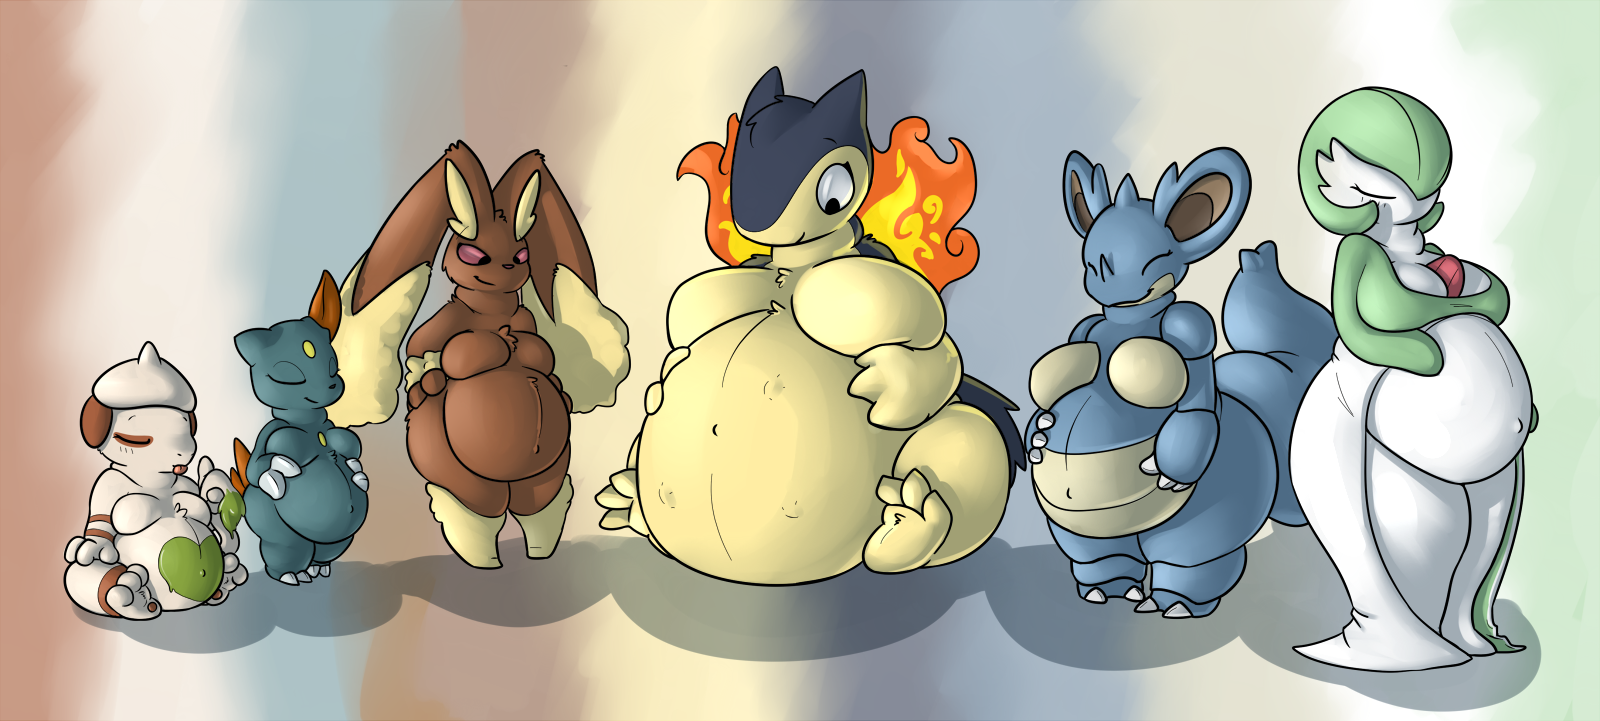 Pokemon HeartGold Hall Of Fame by XxNeo-The-HedgehogxX on DeviantArt